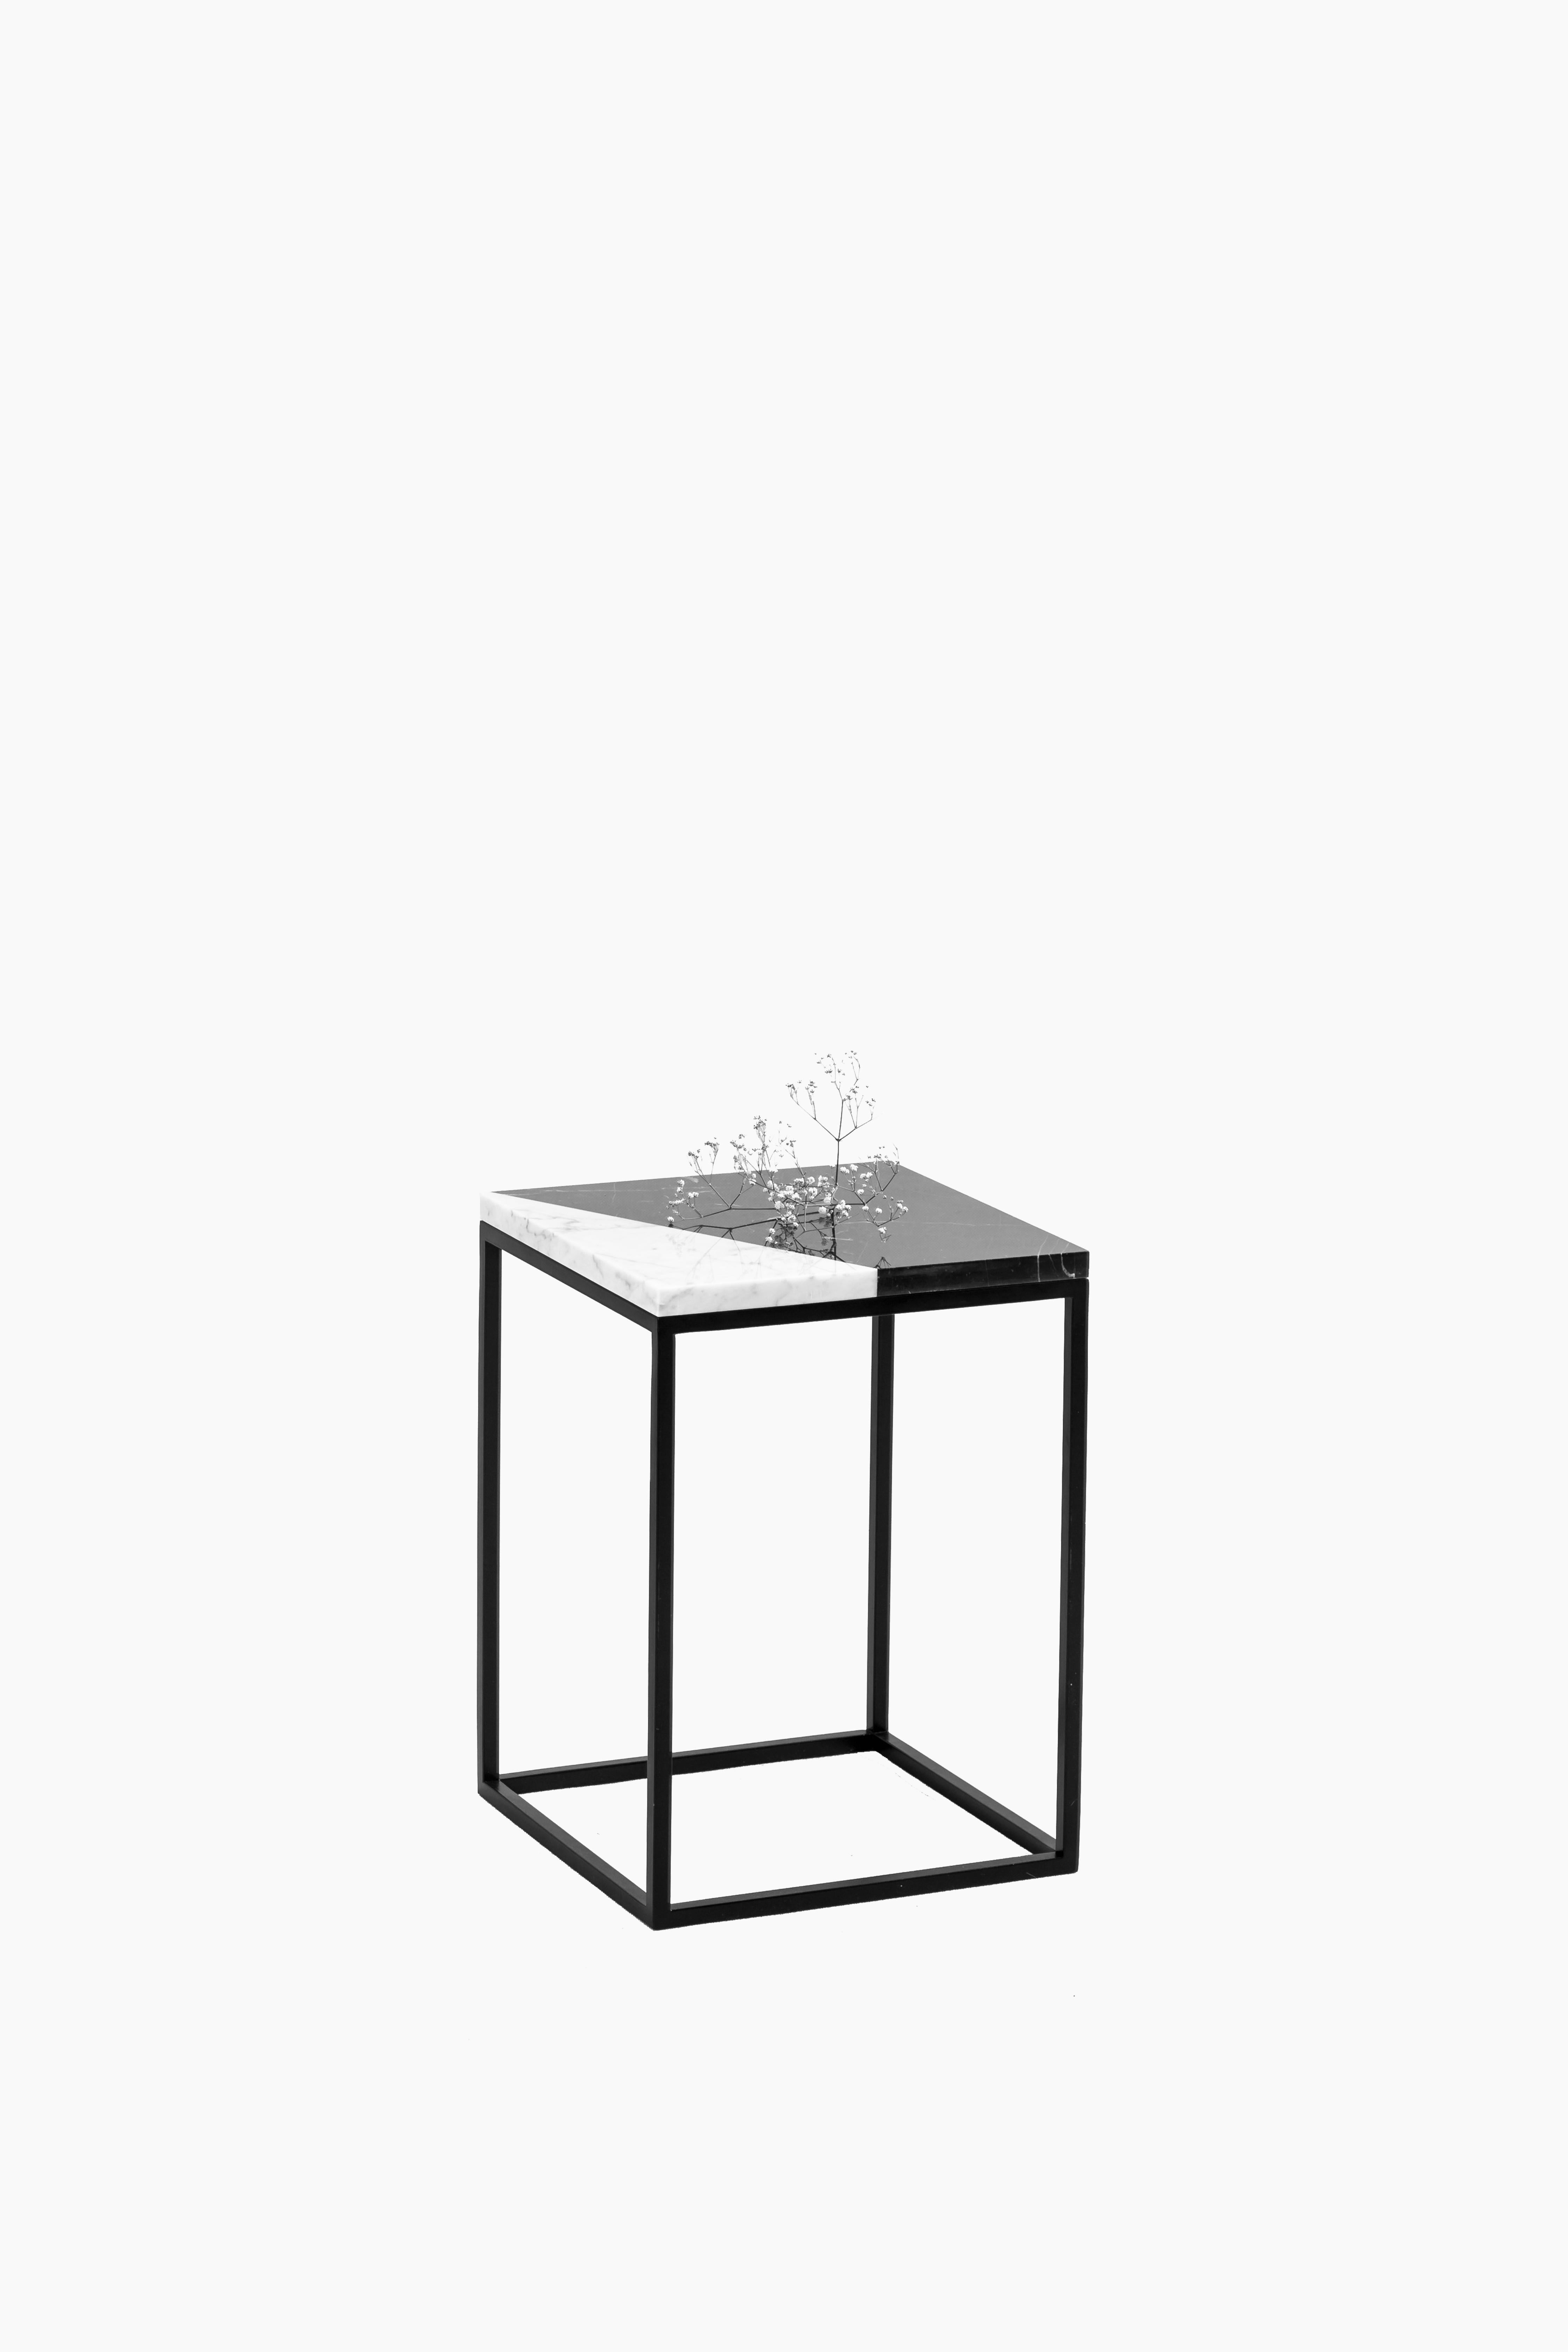 Post-Modern Set of 2 Small Black and White Cut Side Tables by Un’common